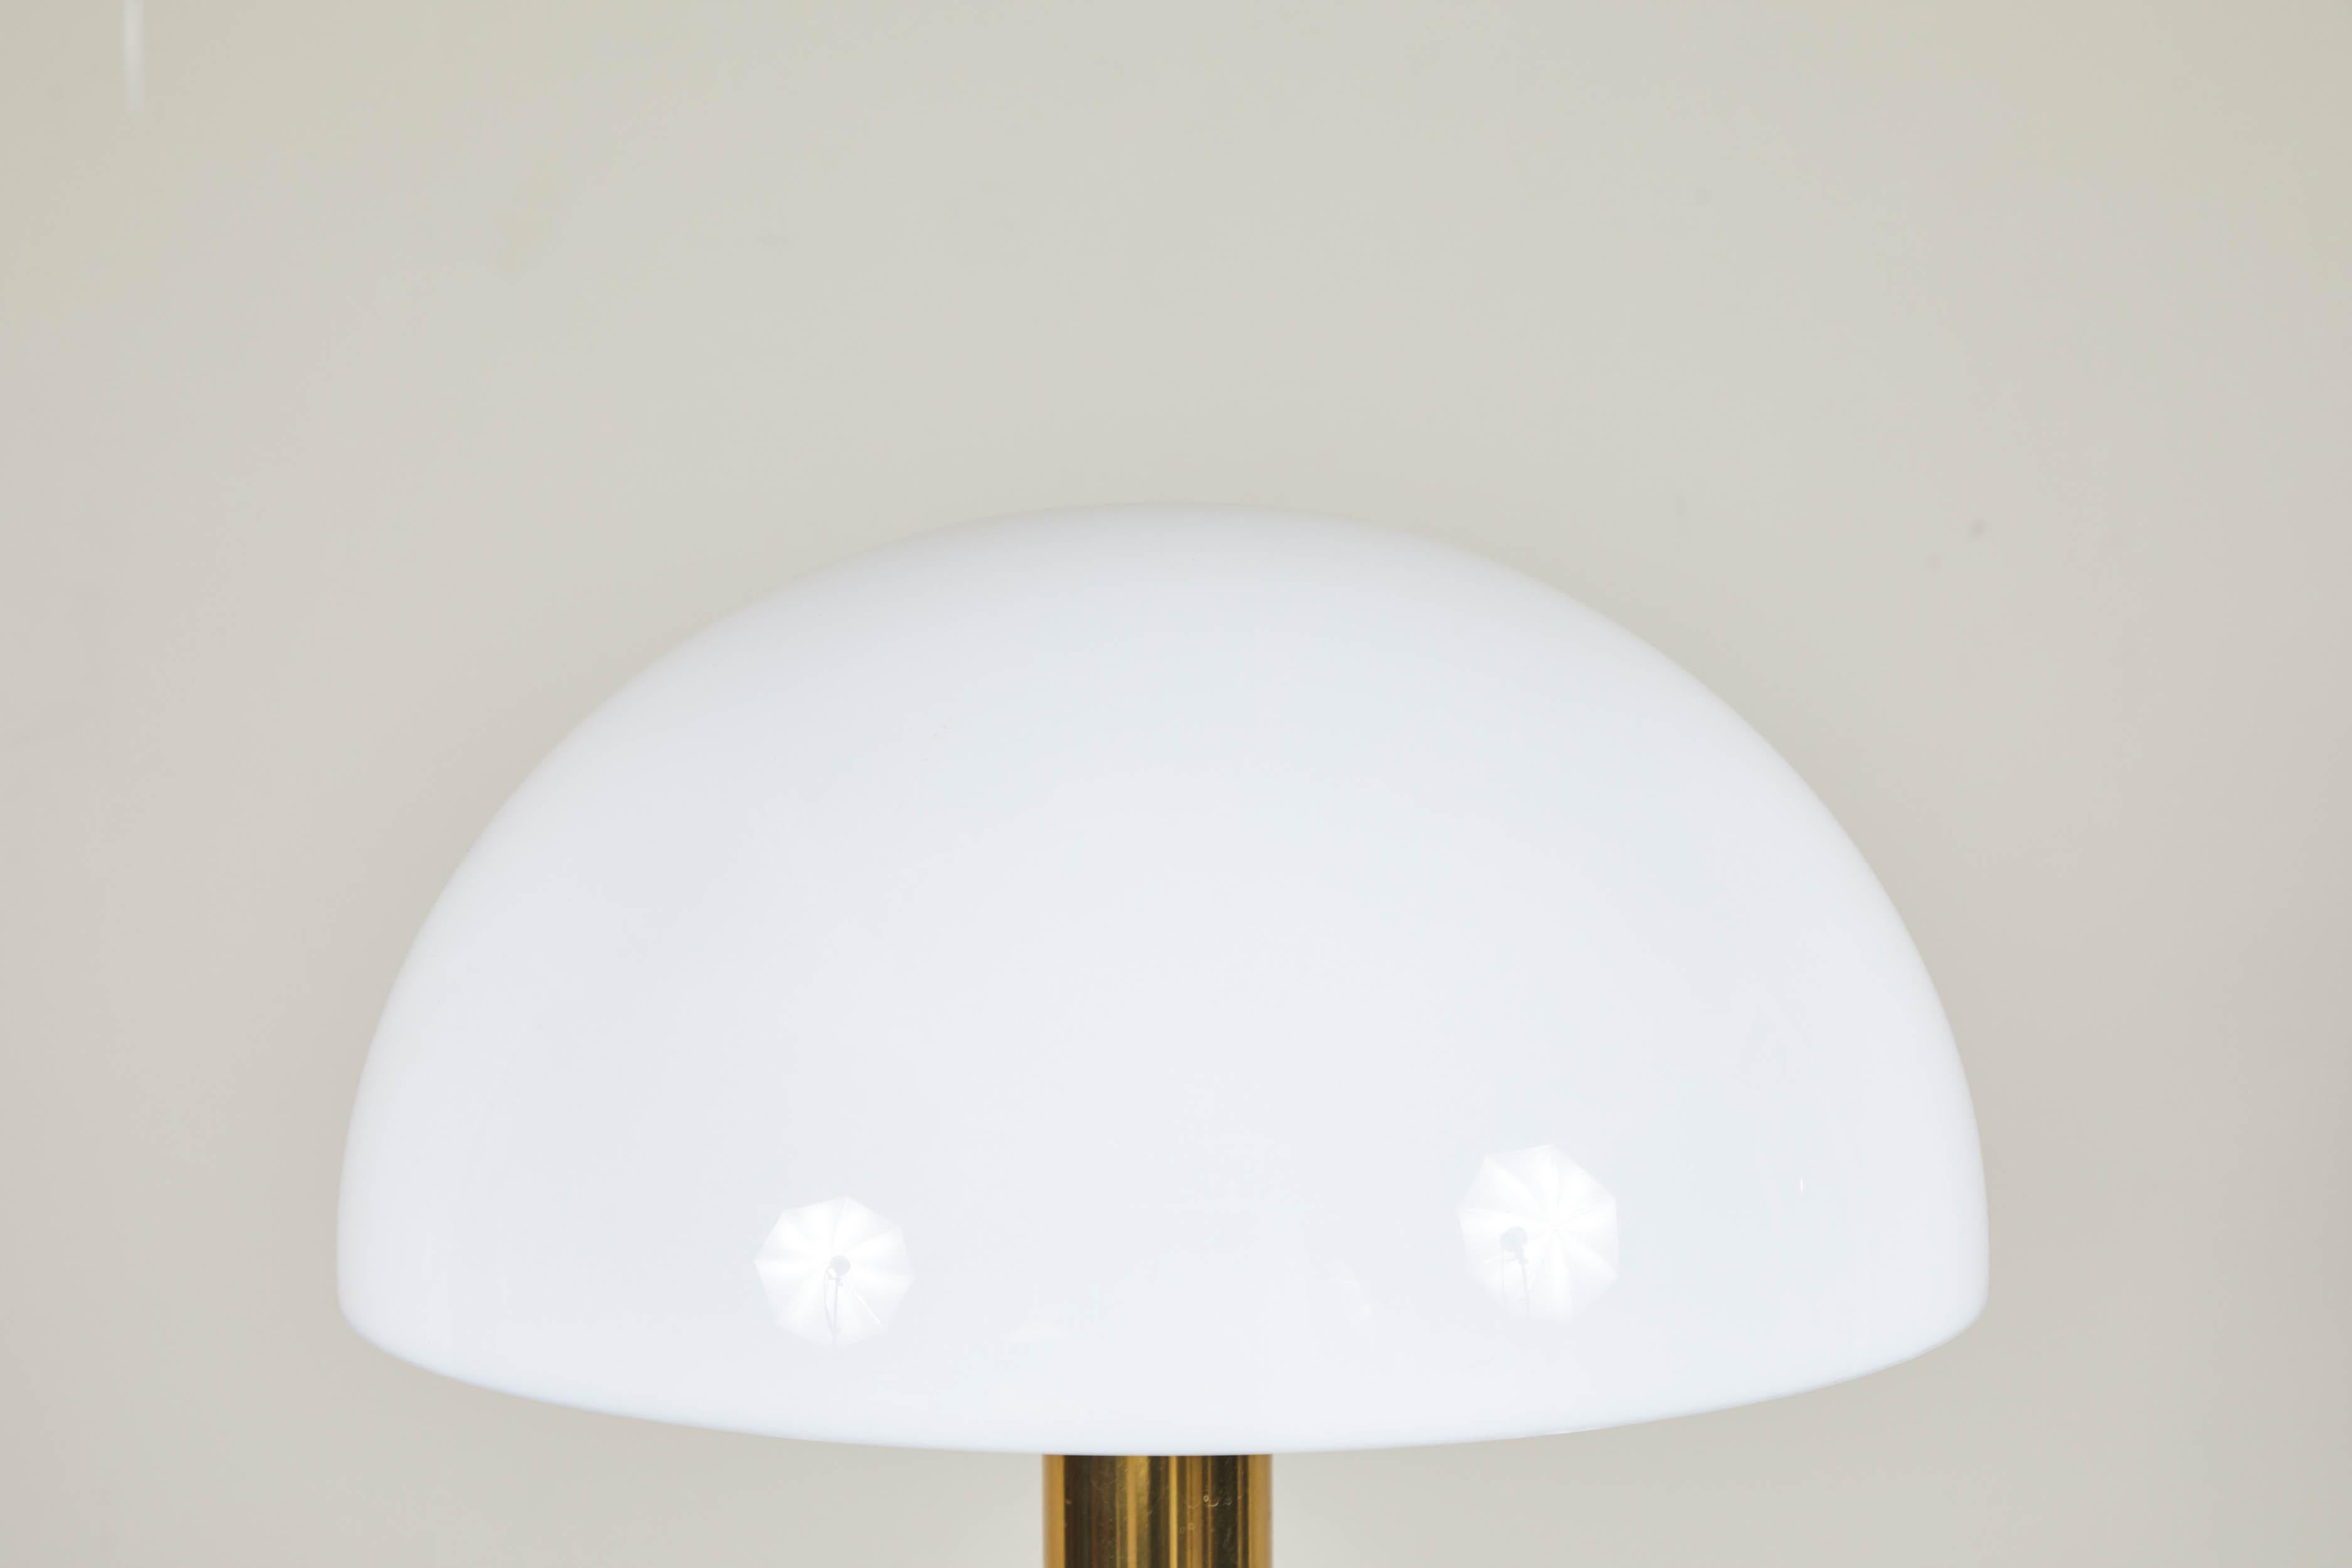 A Gage Cauchois brass and Lucite table lamp. The three-way dimmer is touch-controlled on the brass stem. Lucite base and exposed bulb with a frosted Lucite dome.